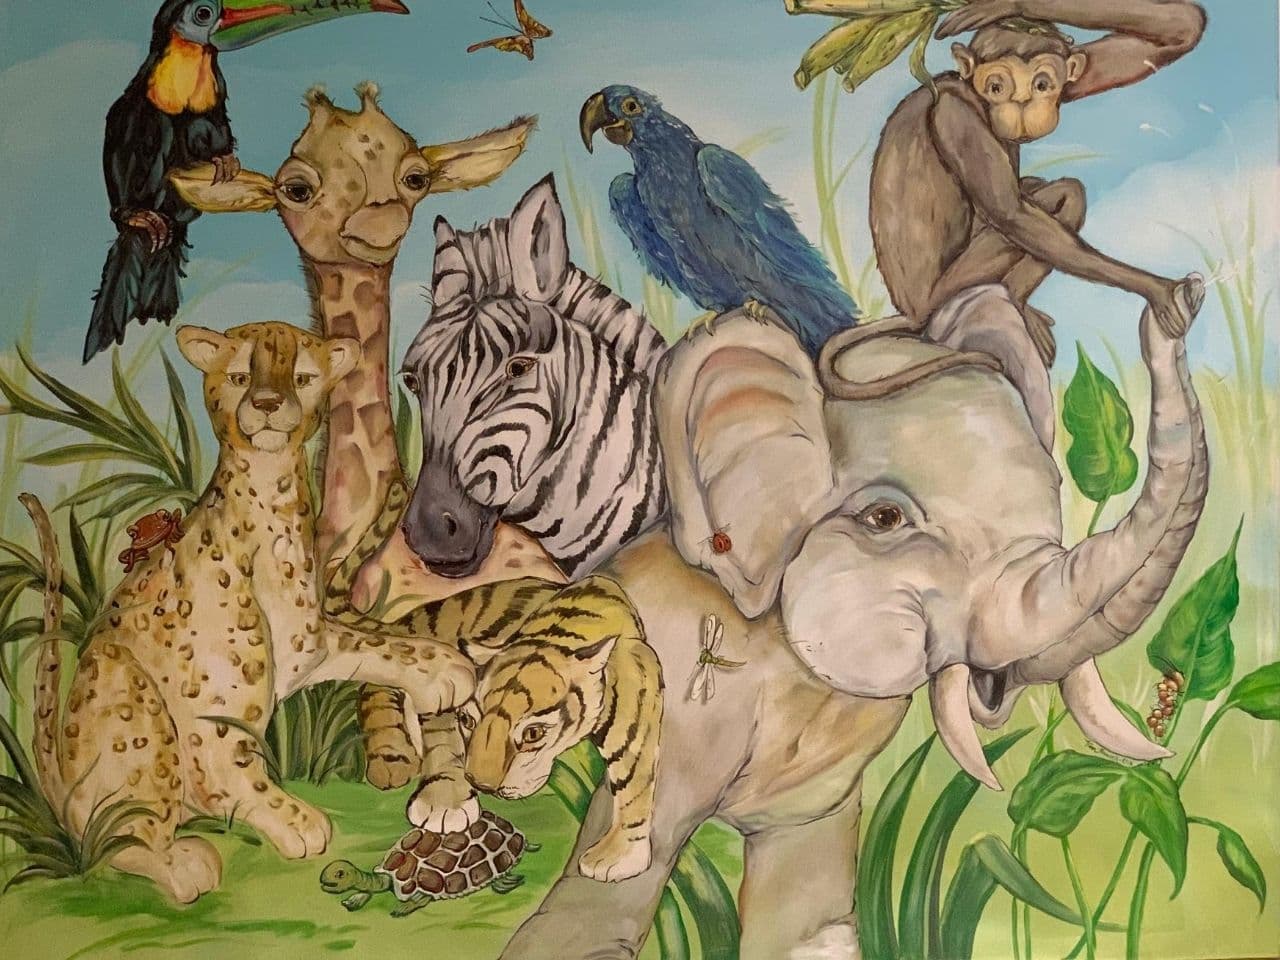 Colorful wall art in the clinic features an elephant, monkey, giraffe, cheetah, zebra, tiger, turtle, butterfly, and tucan.